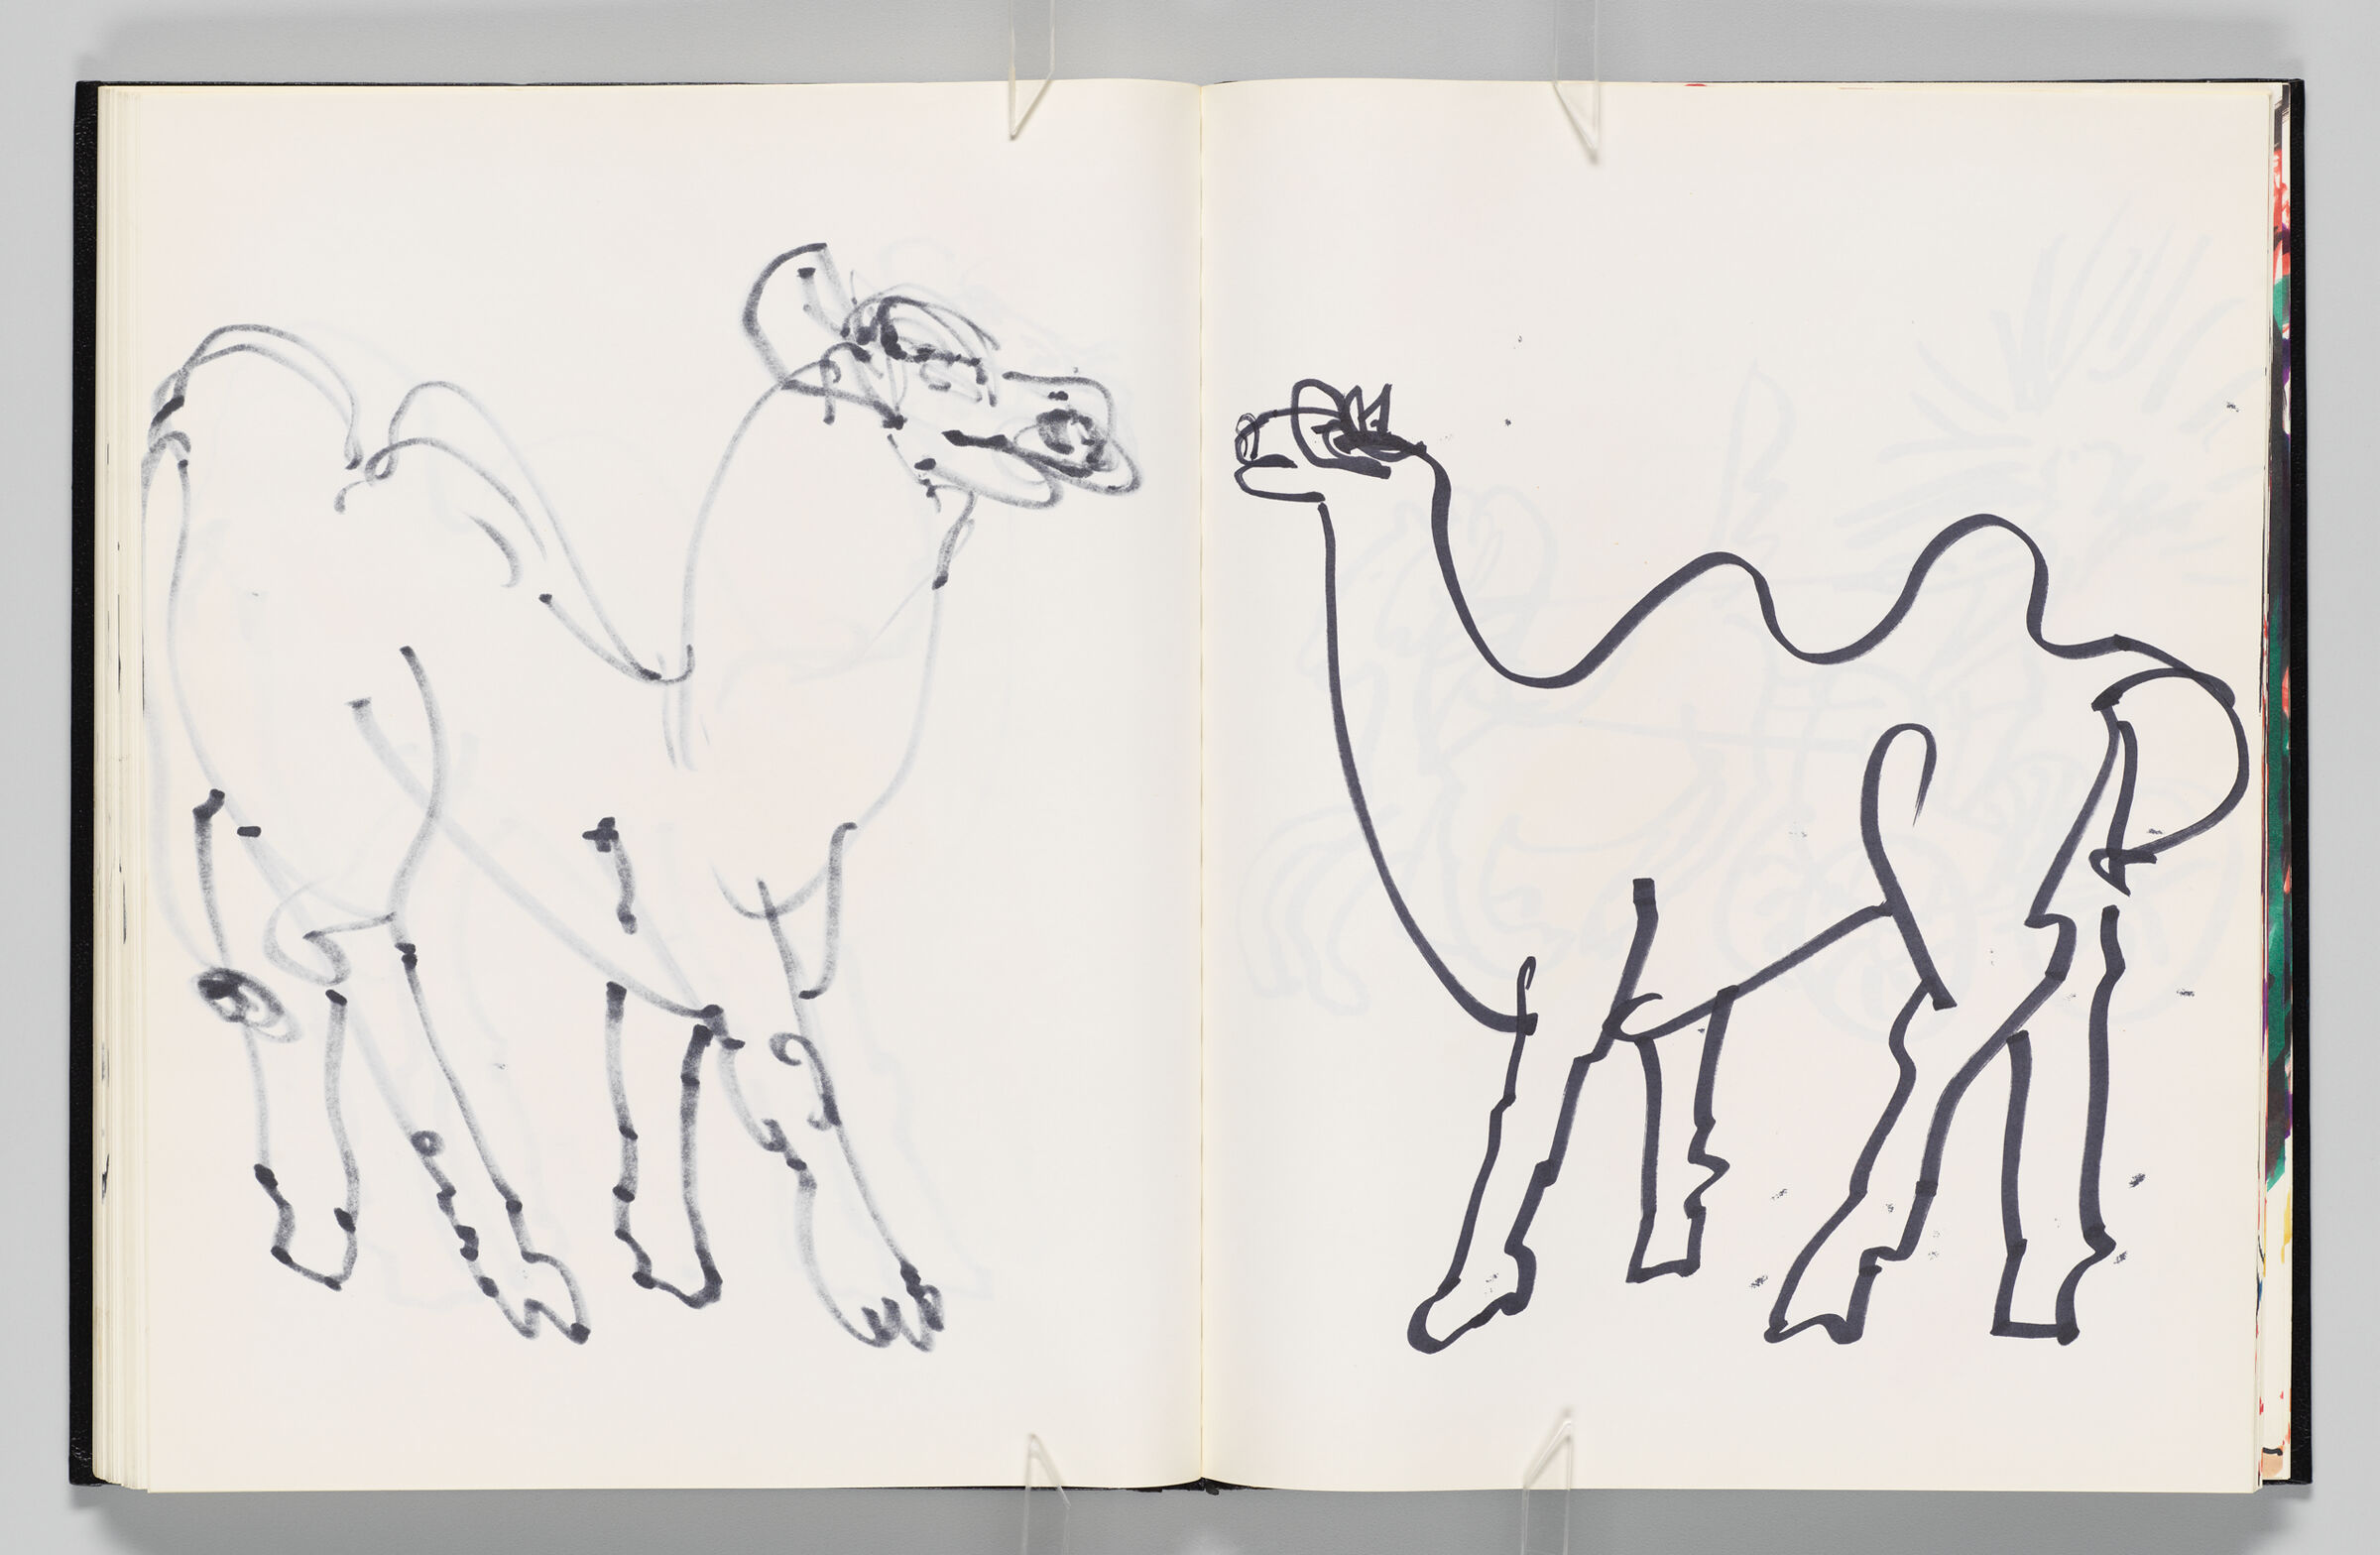 Untitled (Bleed-Through Of Previous Page, Left Page); Untitled (Camel, Right Page)